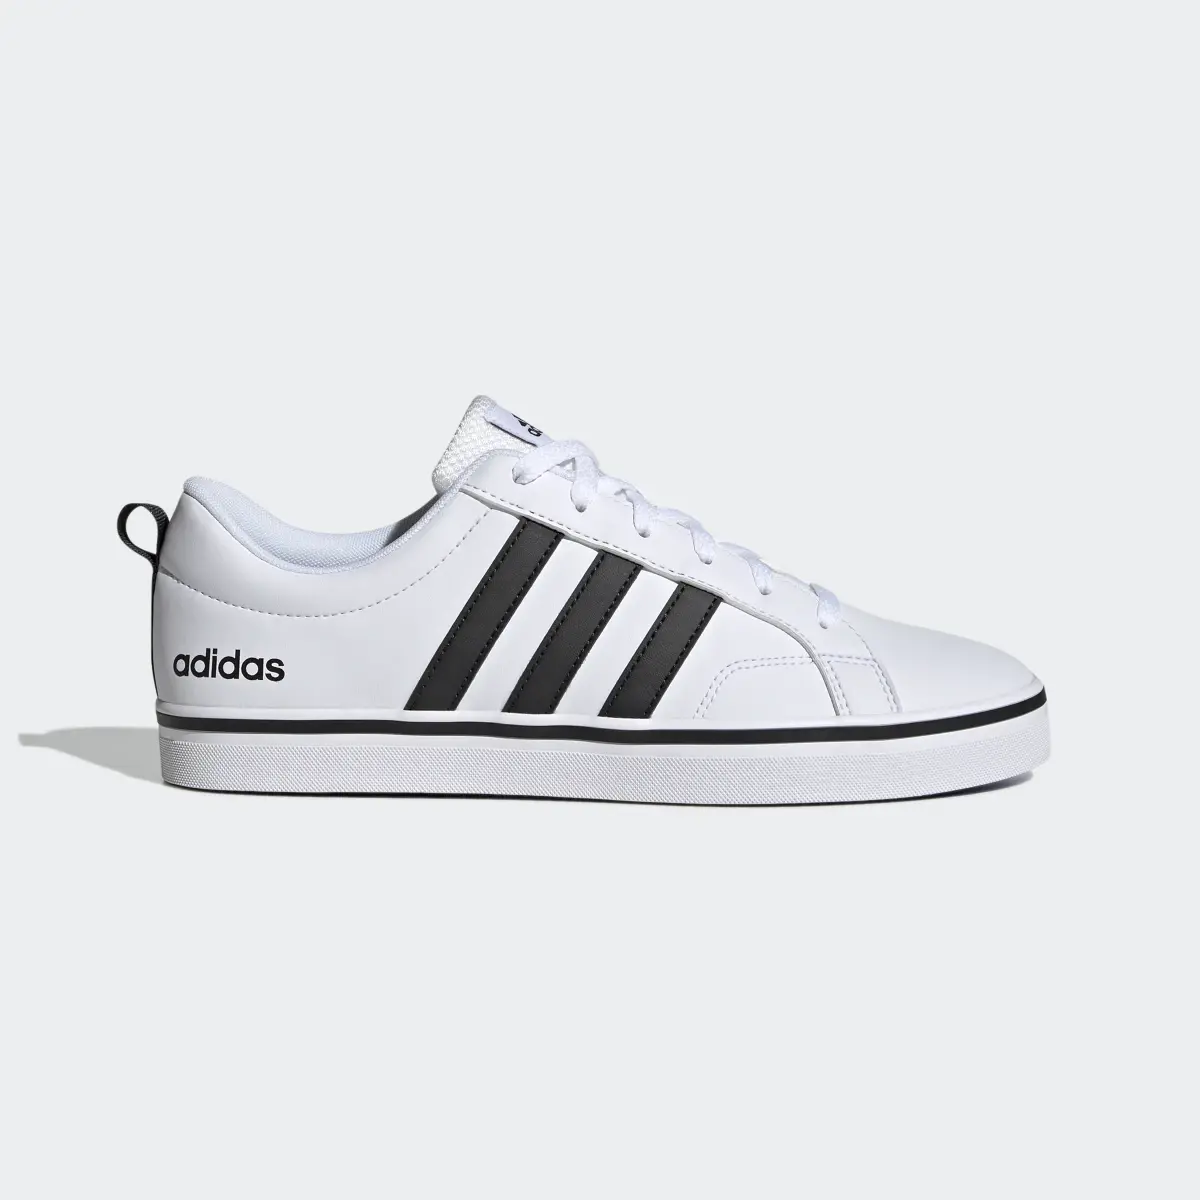 Adidas VS Pace 2.0 Schuh. 2